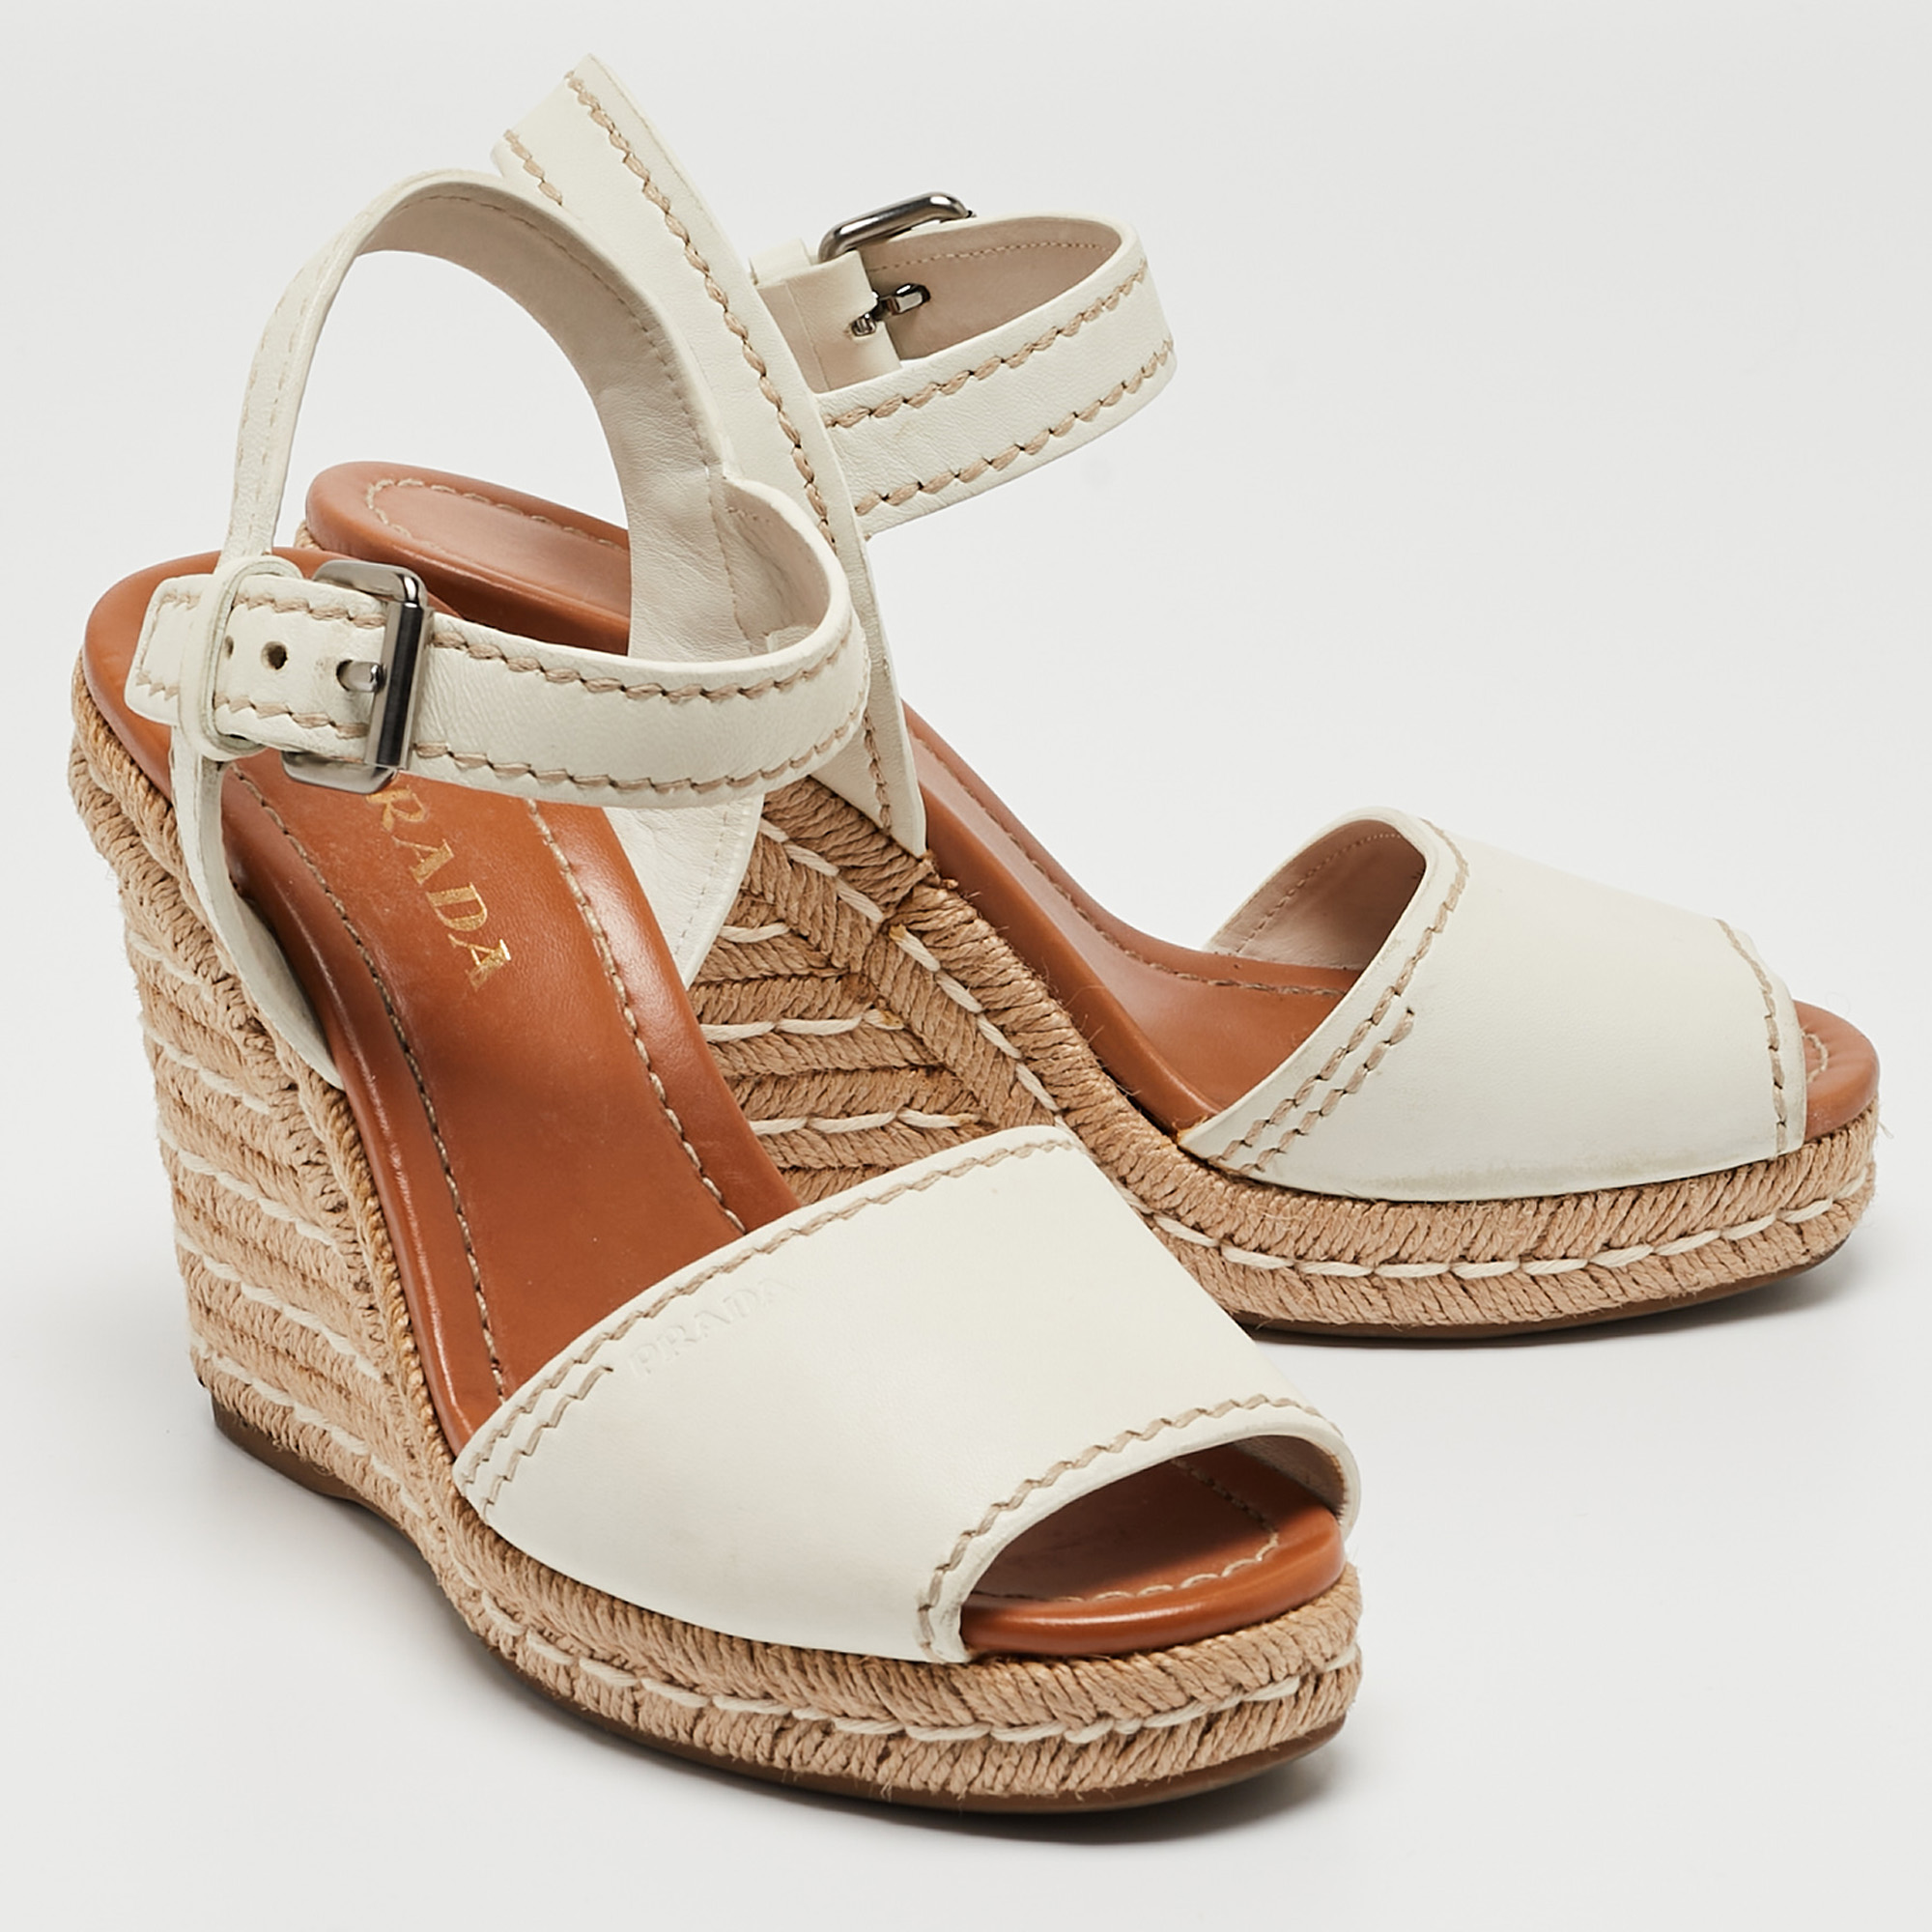 Prada White Leather Espadrille Wedge Ankle Strap Sandals Size 38